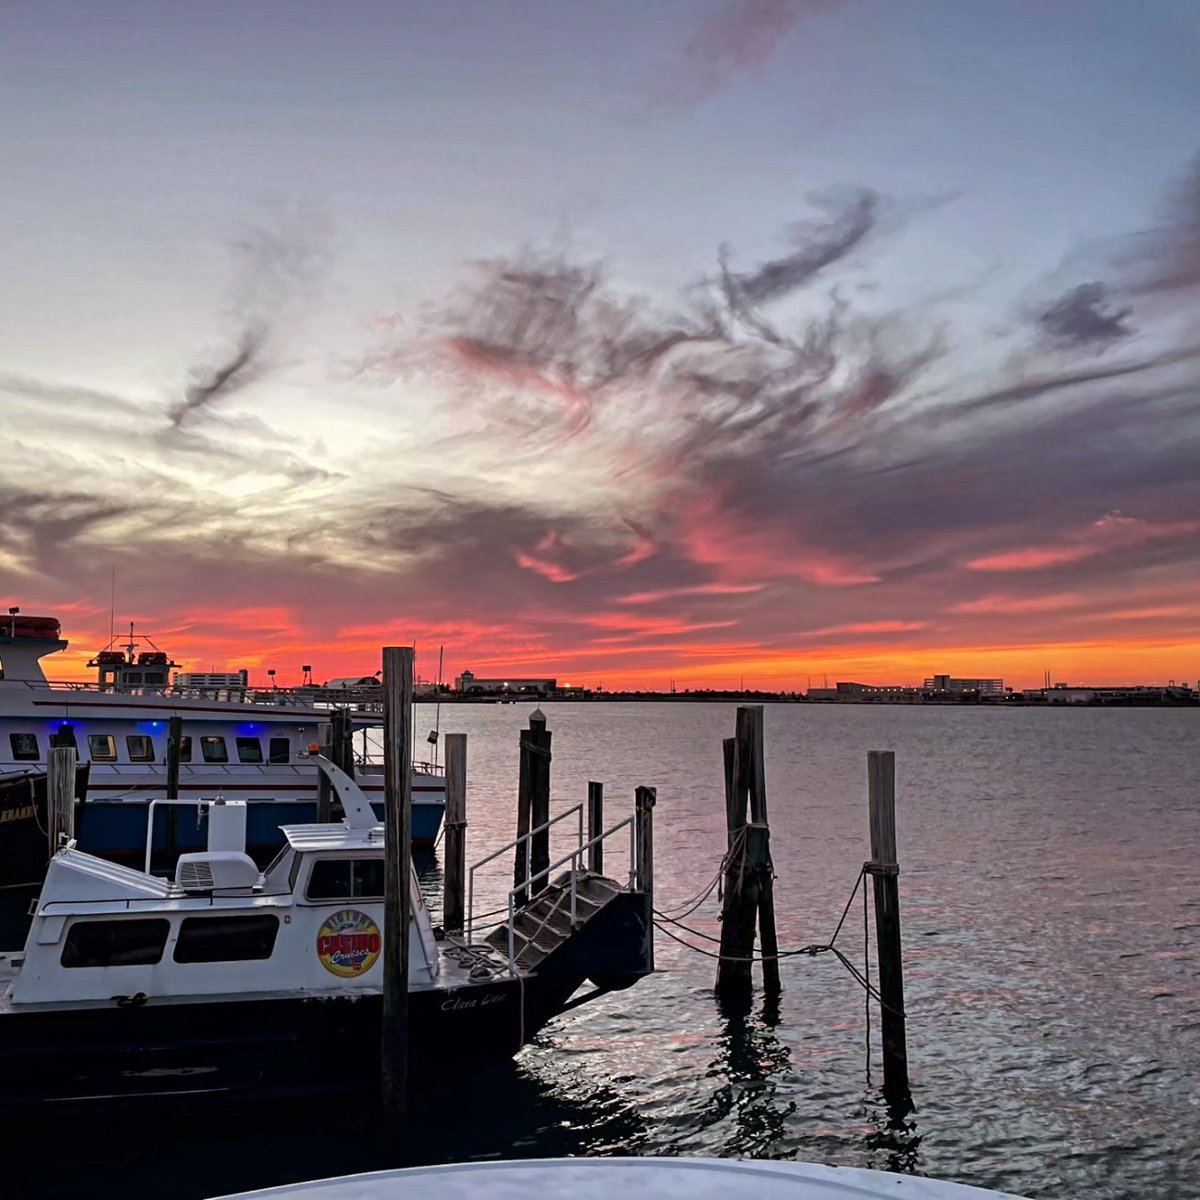 Last night's sunset pics courtesy of Matt... at Rusty's at the Port!! 😎👍🌅🚢🌴🍹#sunsetsarebest #sunsets #boatlife #daycrew #portlife #decklife #rustysfam #rustysseafood #portcanaveral